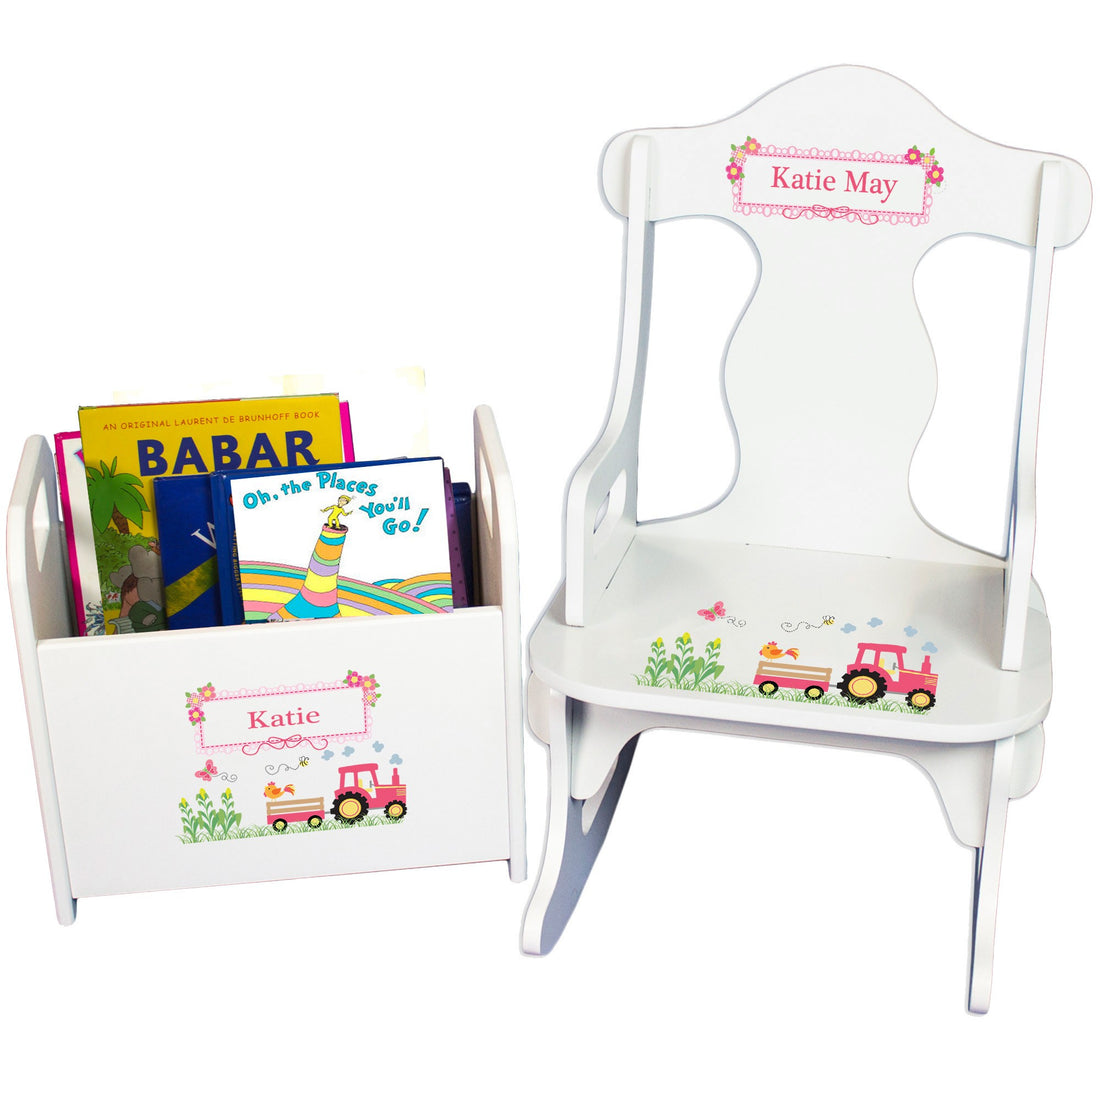 Personalized Puzzle Rocker And Book Caddy baby gift set With Pink Tractor Design